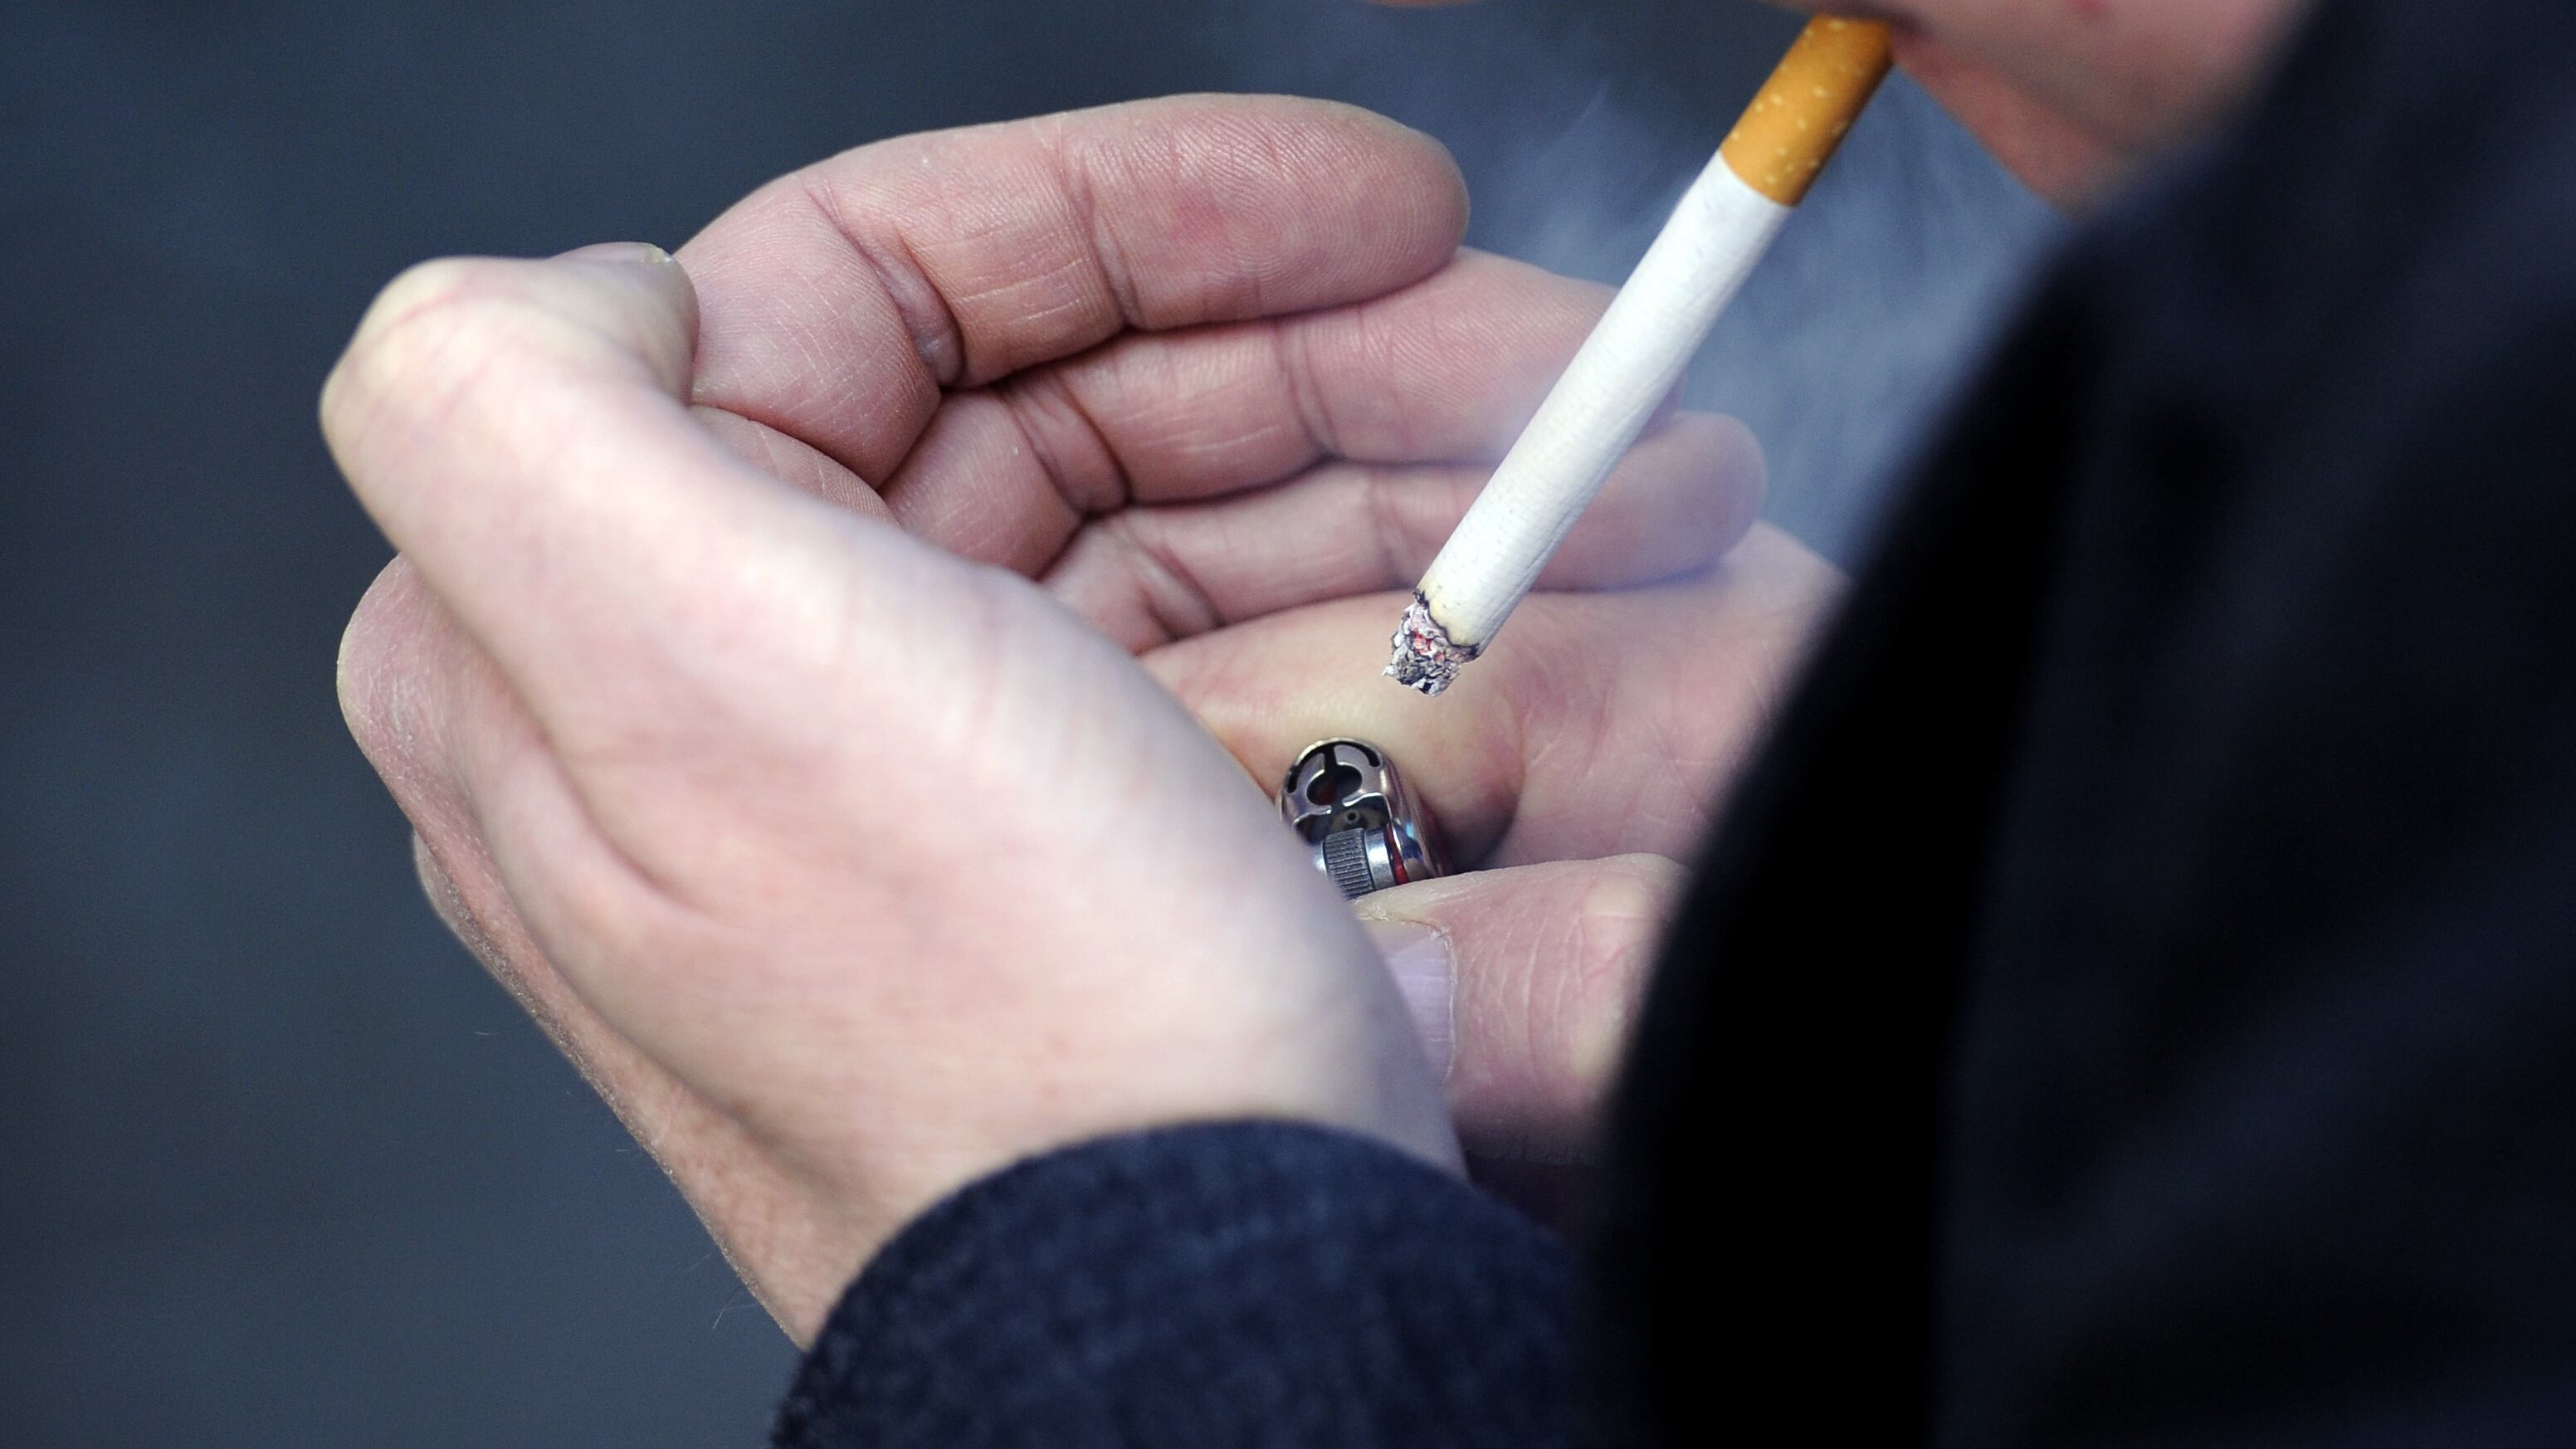 Cost is an increasingly important motive for quitting smoking, according to a new study